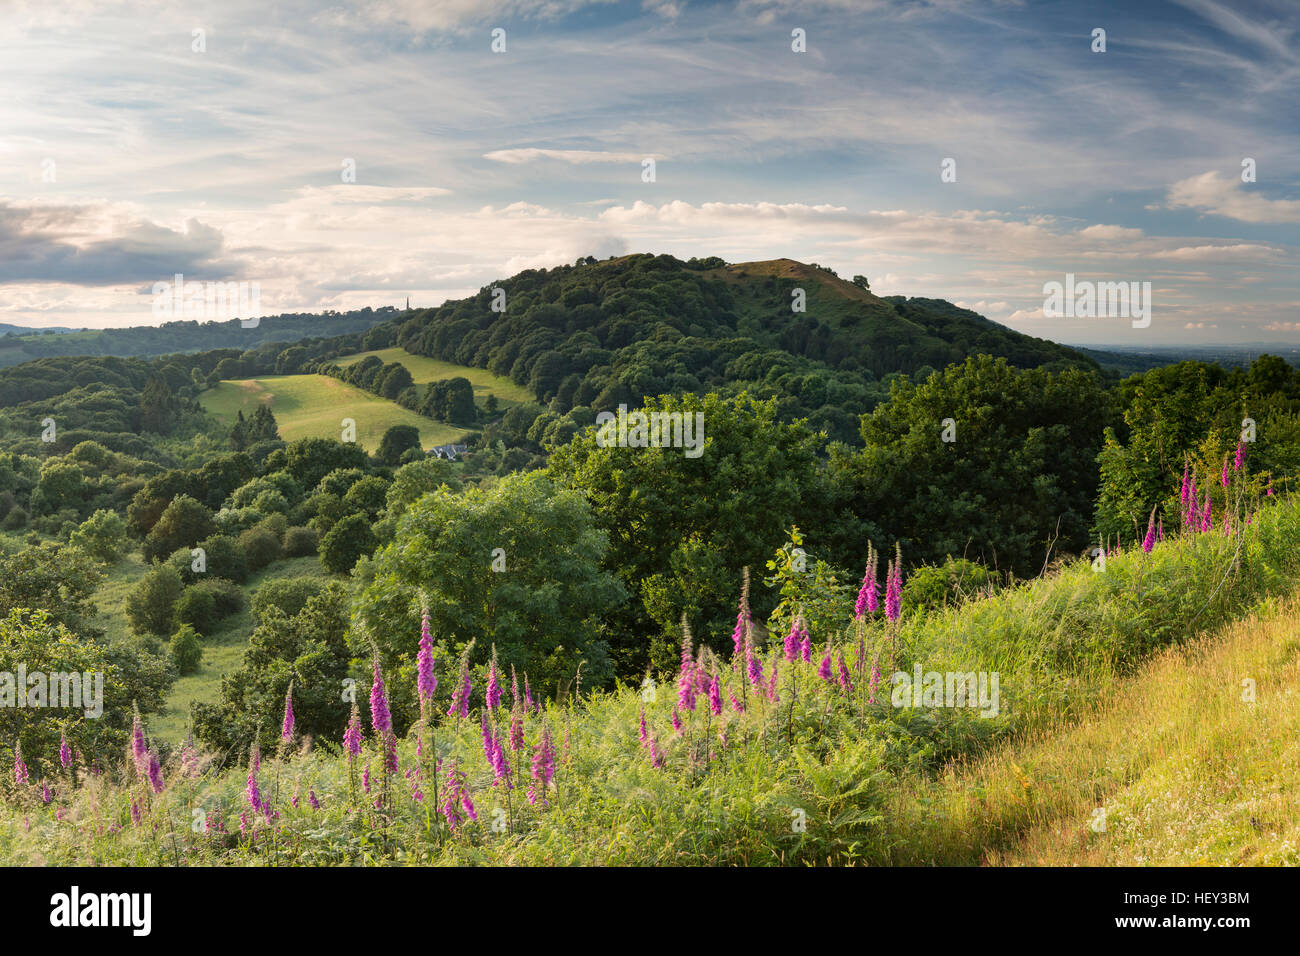 Whiteleaved Oak stands on the side of Raggedstone hill, Malvern Hills, Herefordshire Stock Photo